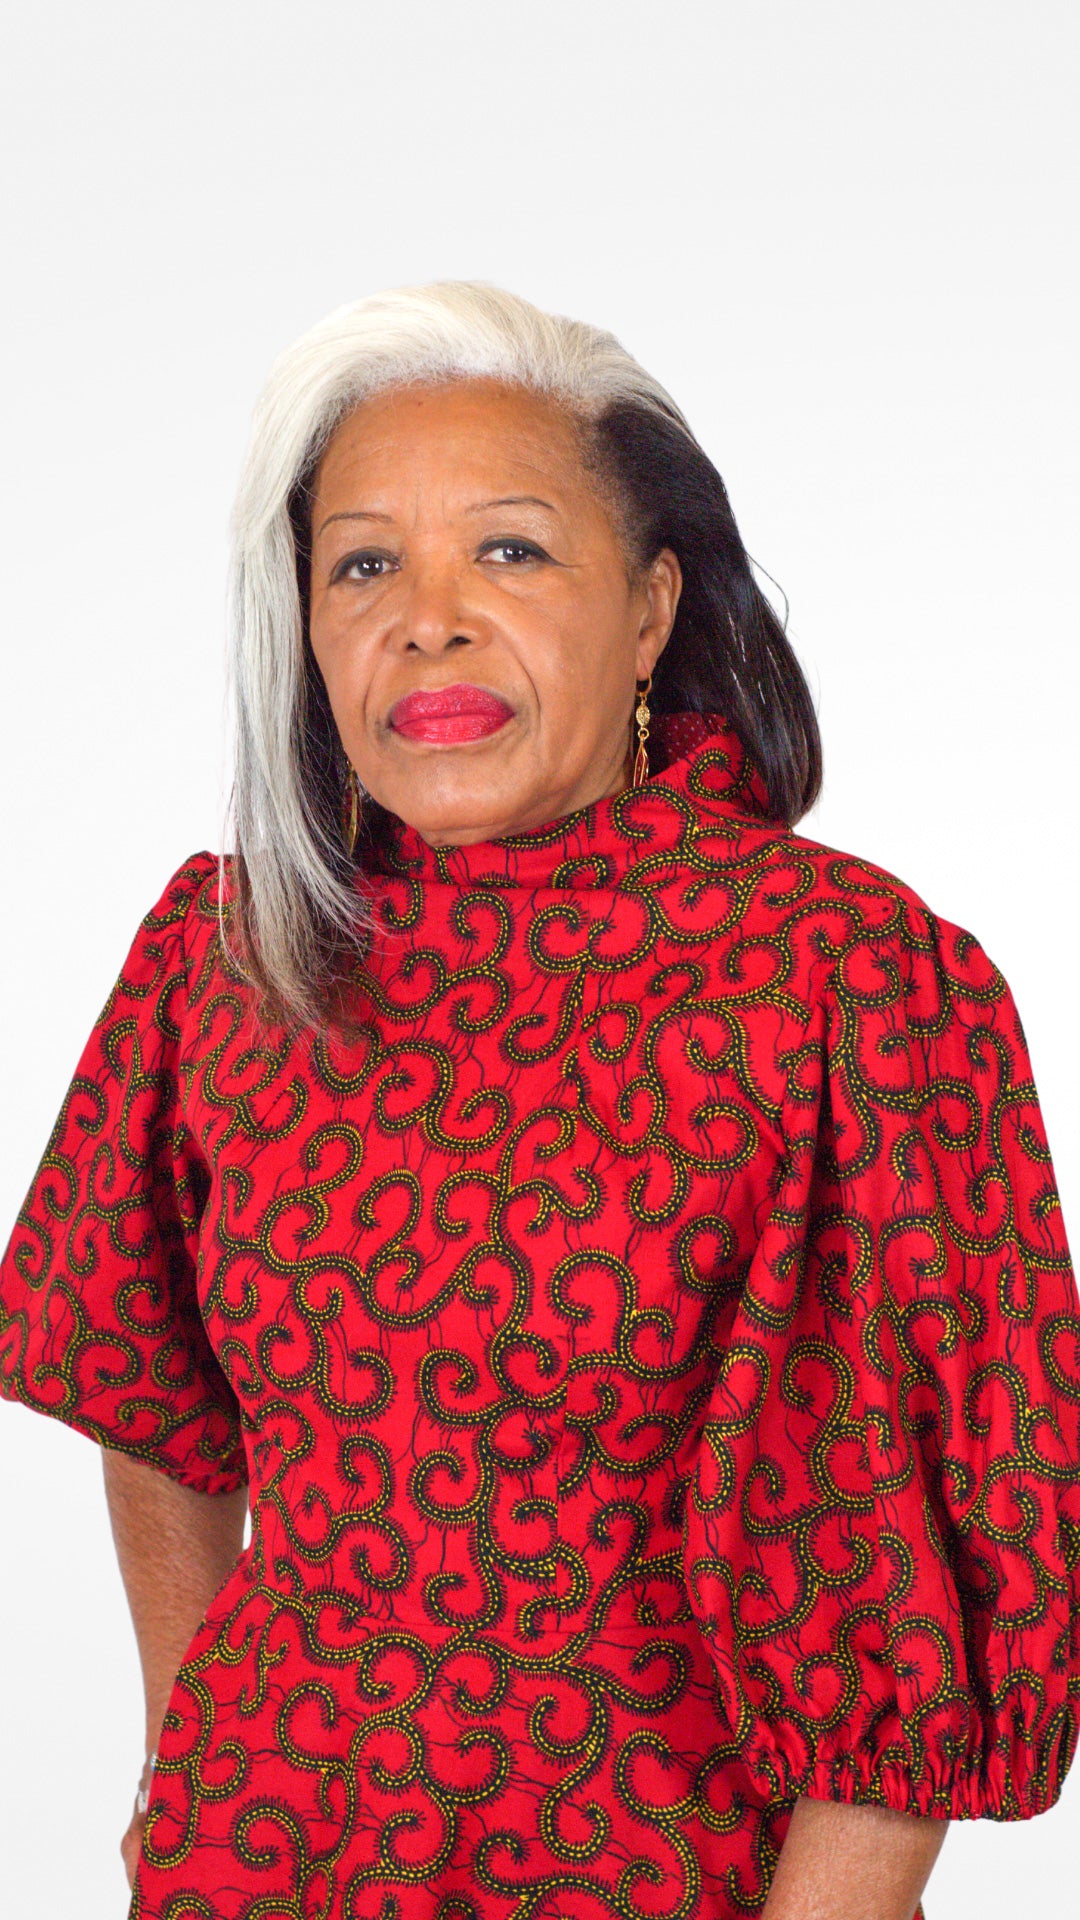 Close up of model's face, showcasing the swirly details, neckline and puff sleeves of the red print dress.